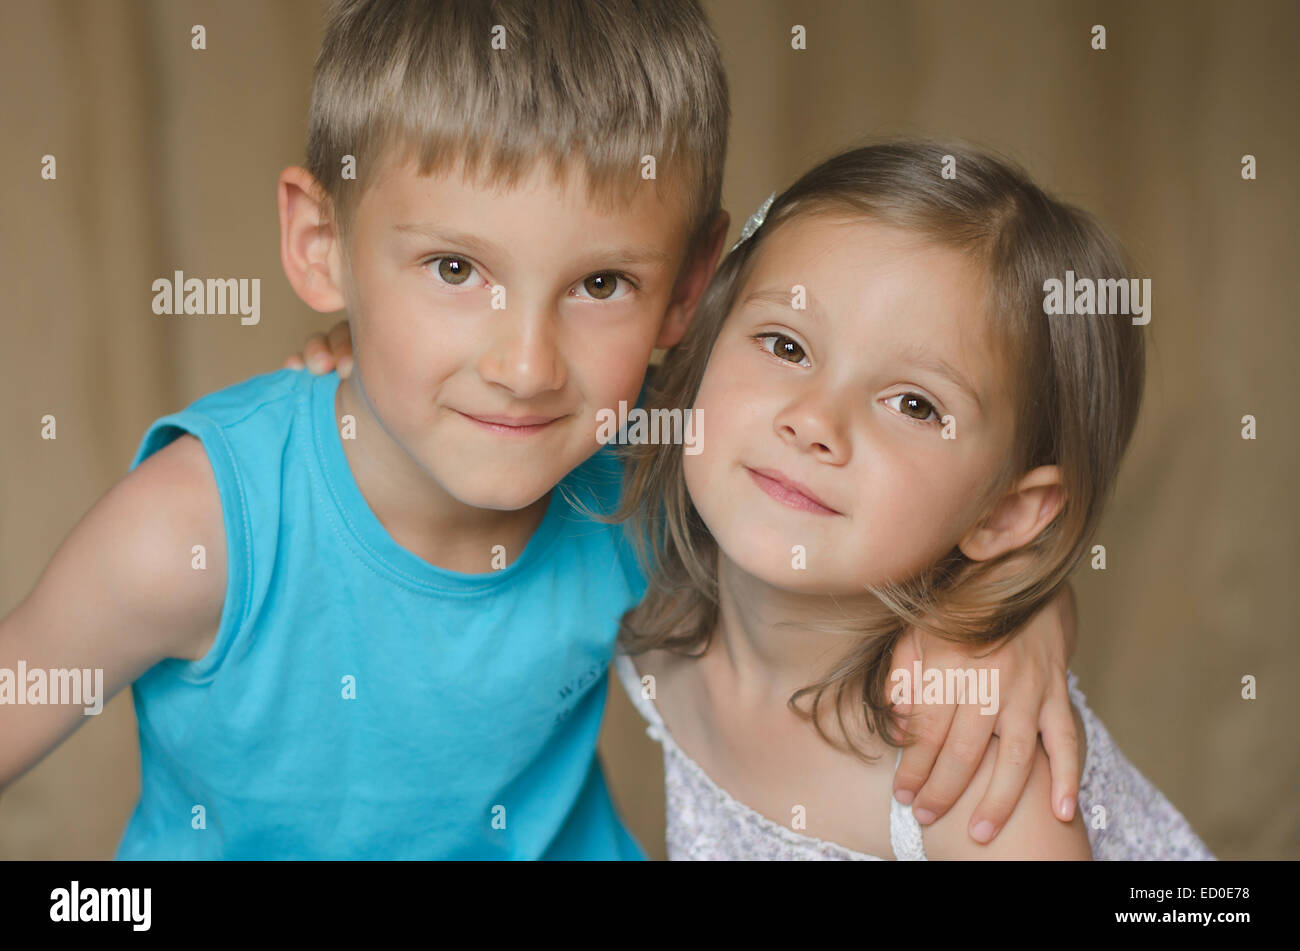 Portrait of brother and sister smiling Banque D'Images